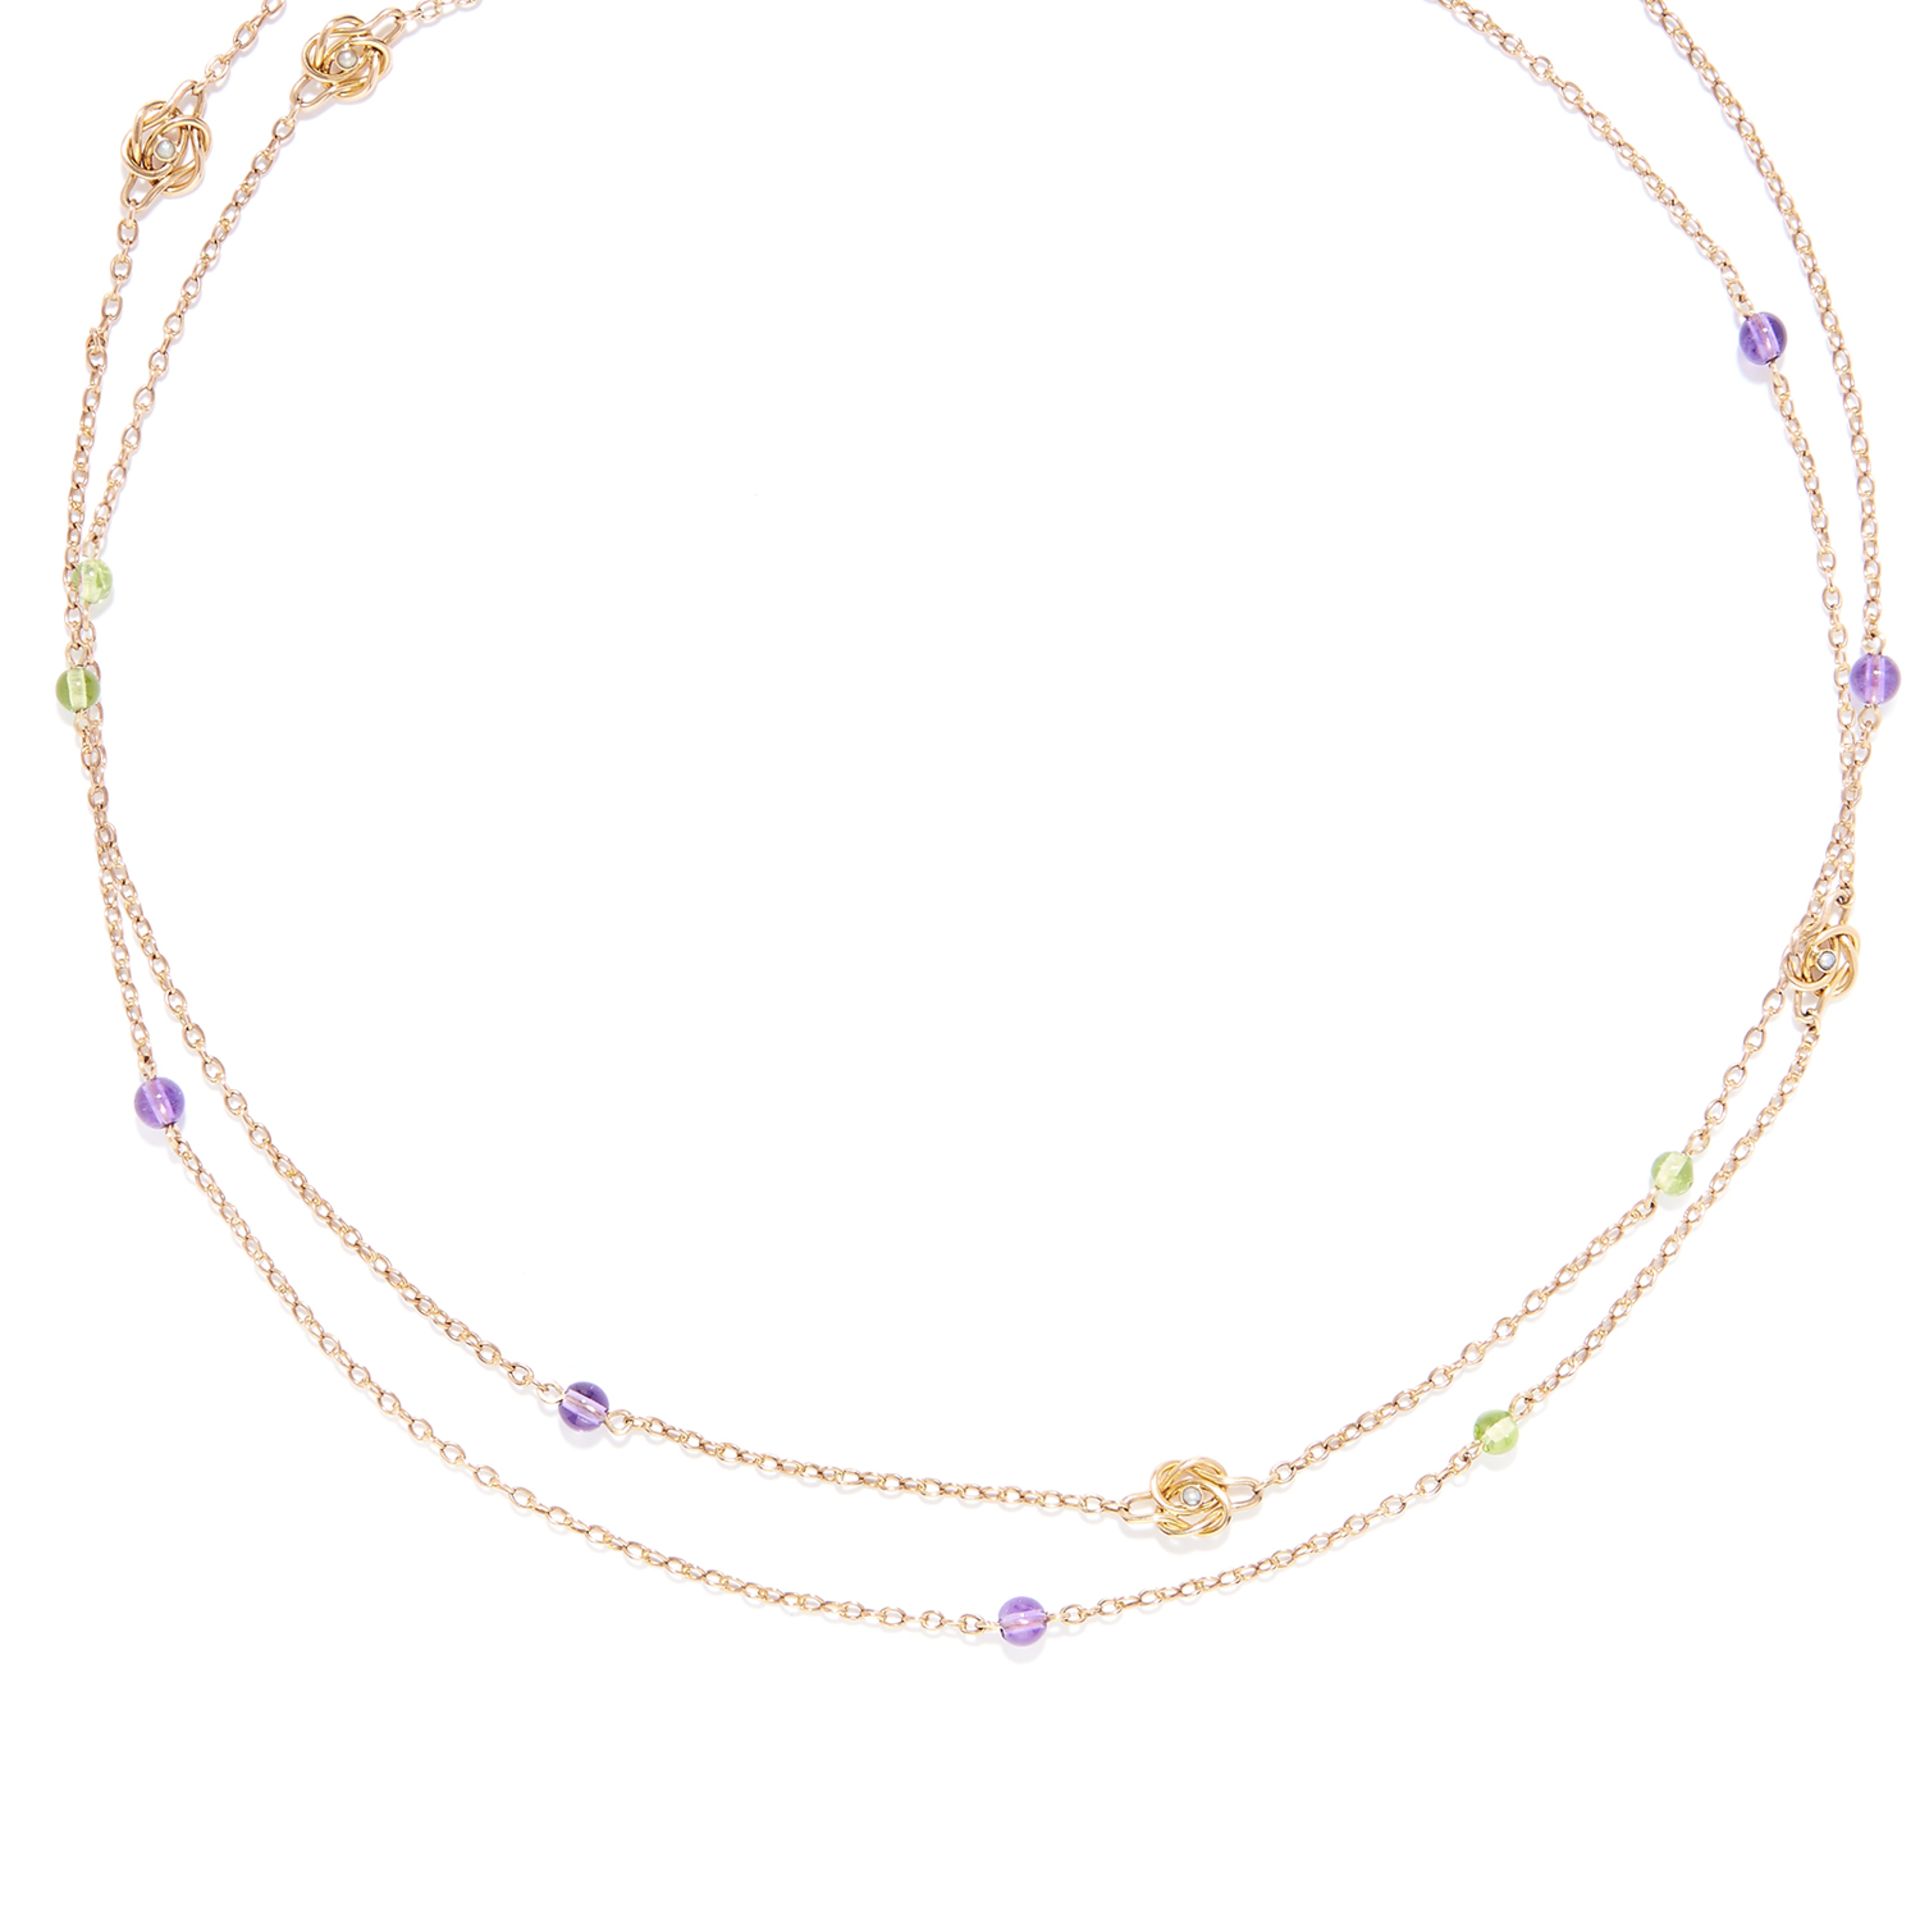 ANTIQUE PEARL, AMETHYST AND PERIDOT SUFFRAGETTE SAUTOIR NECKLACE in yellow gold, the longchain